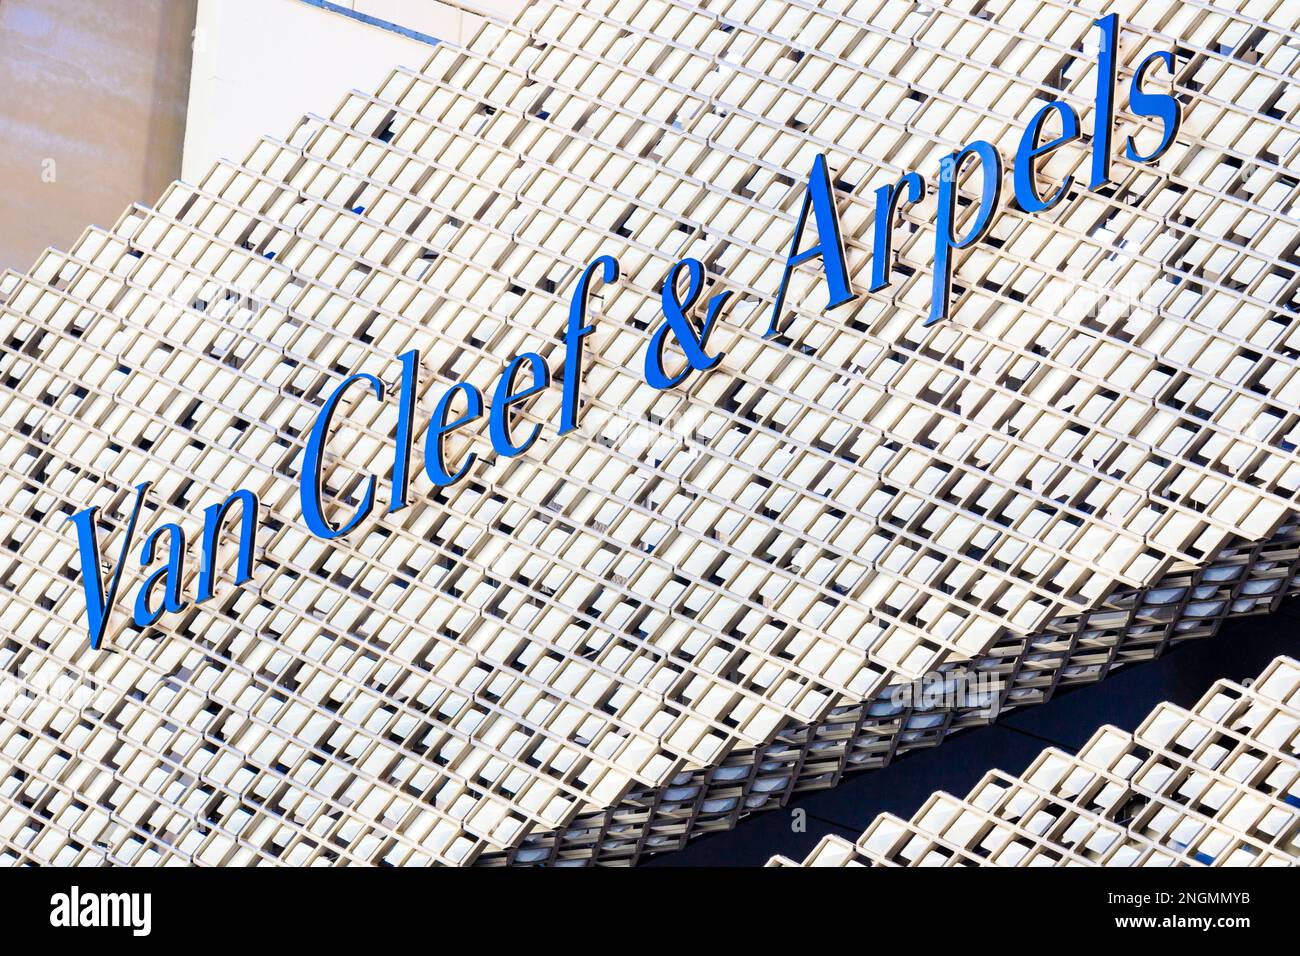 A logo sign outside of a Van Cleef & Arpels retail store in Munich,  Germany, on September 2, 2018 Stock Photo - Alamy